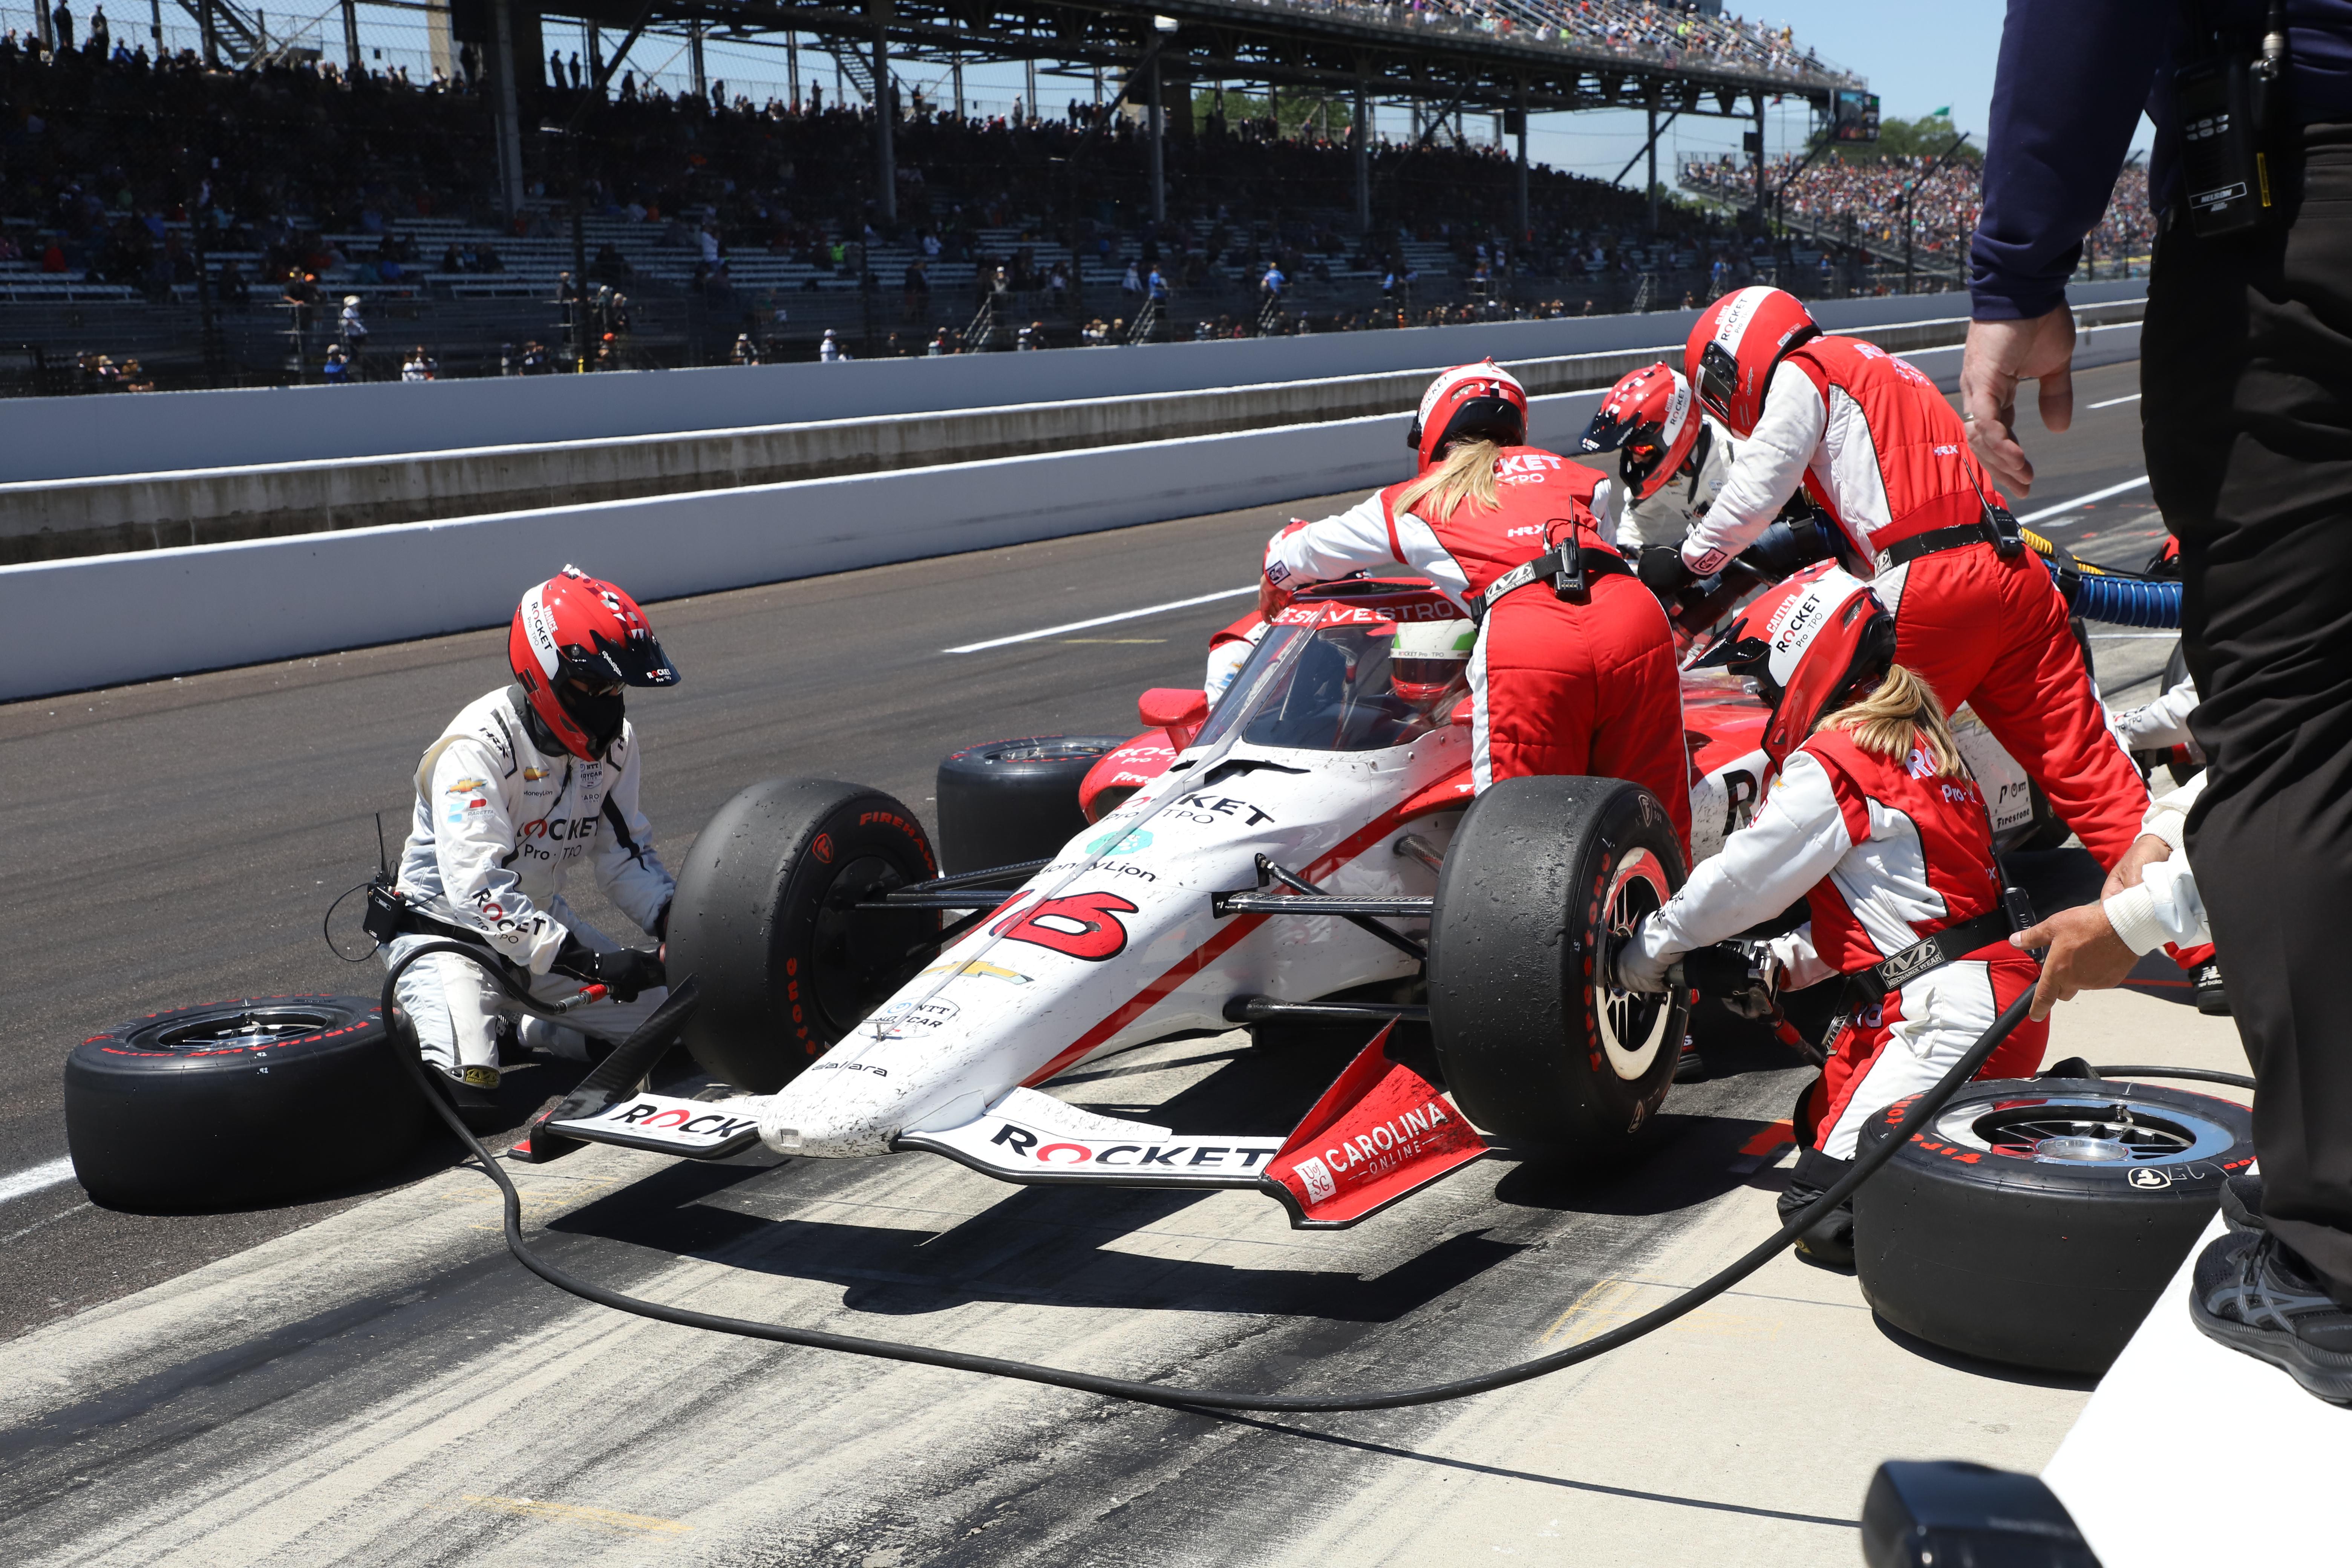 Simona De Silvestro 105th Running Of The Indianapolis 500 Presented By Gainbridge Largeimagewithoutwatermark M43030